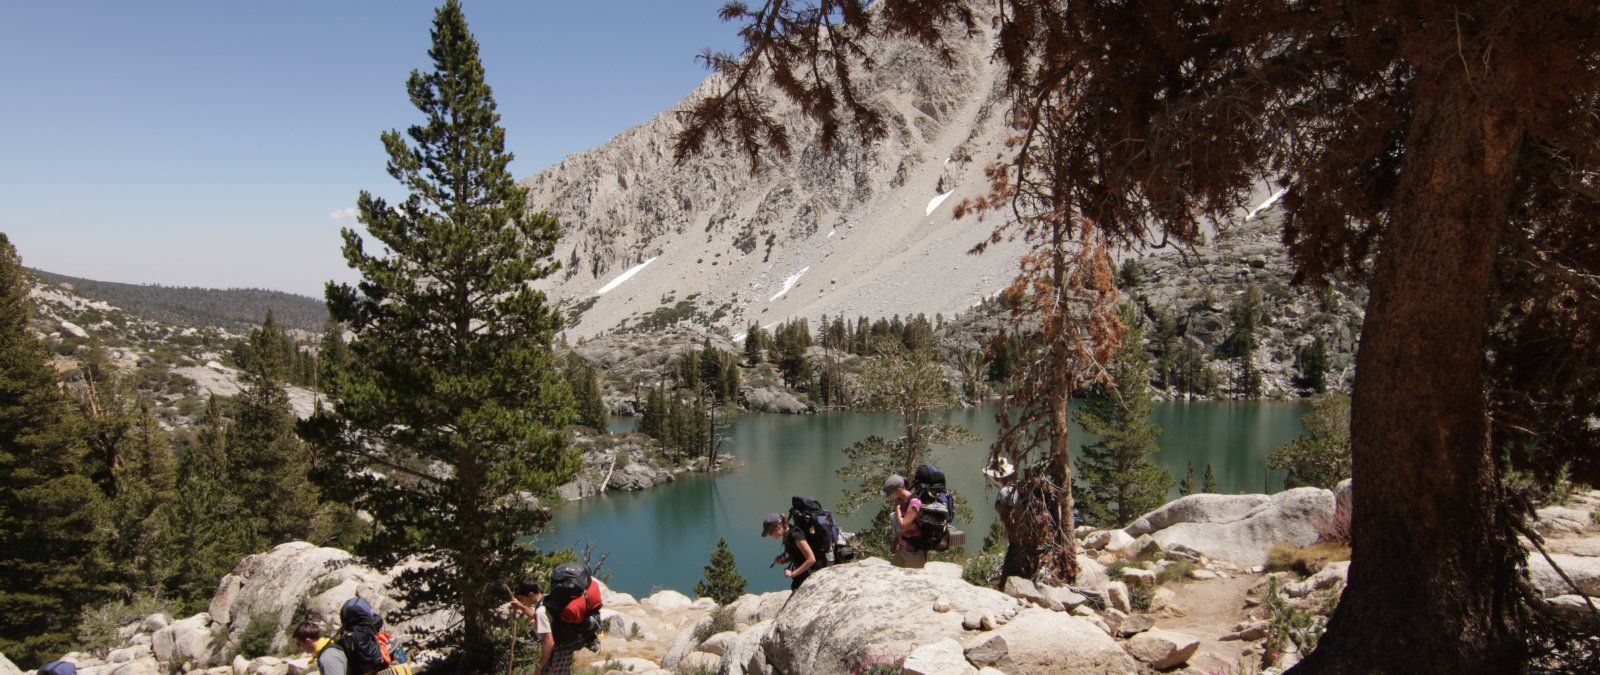 Students hike next to a lake